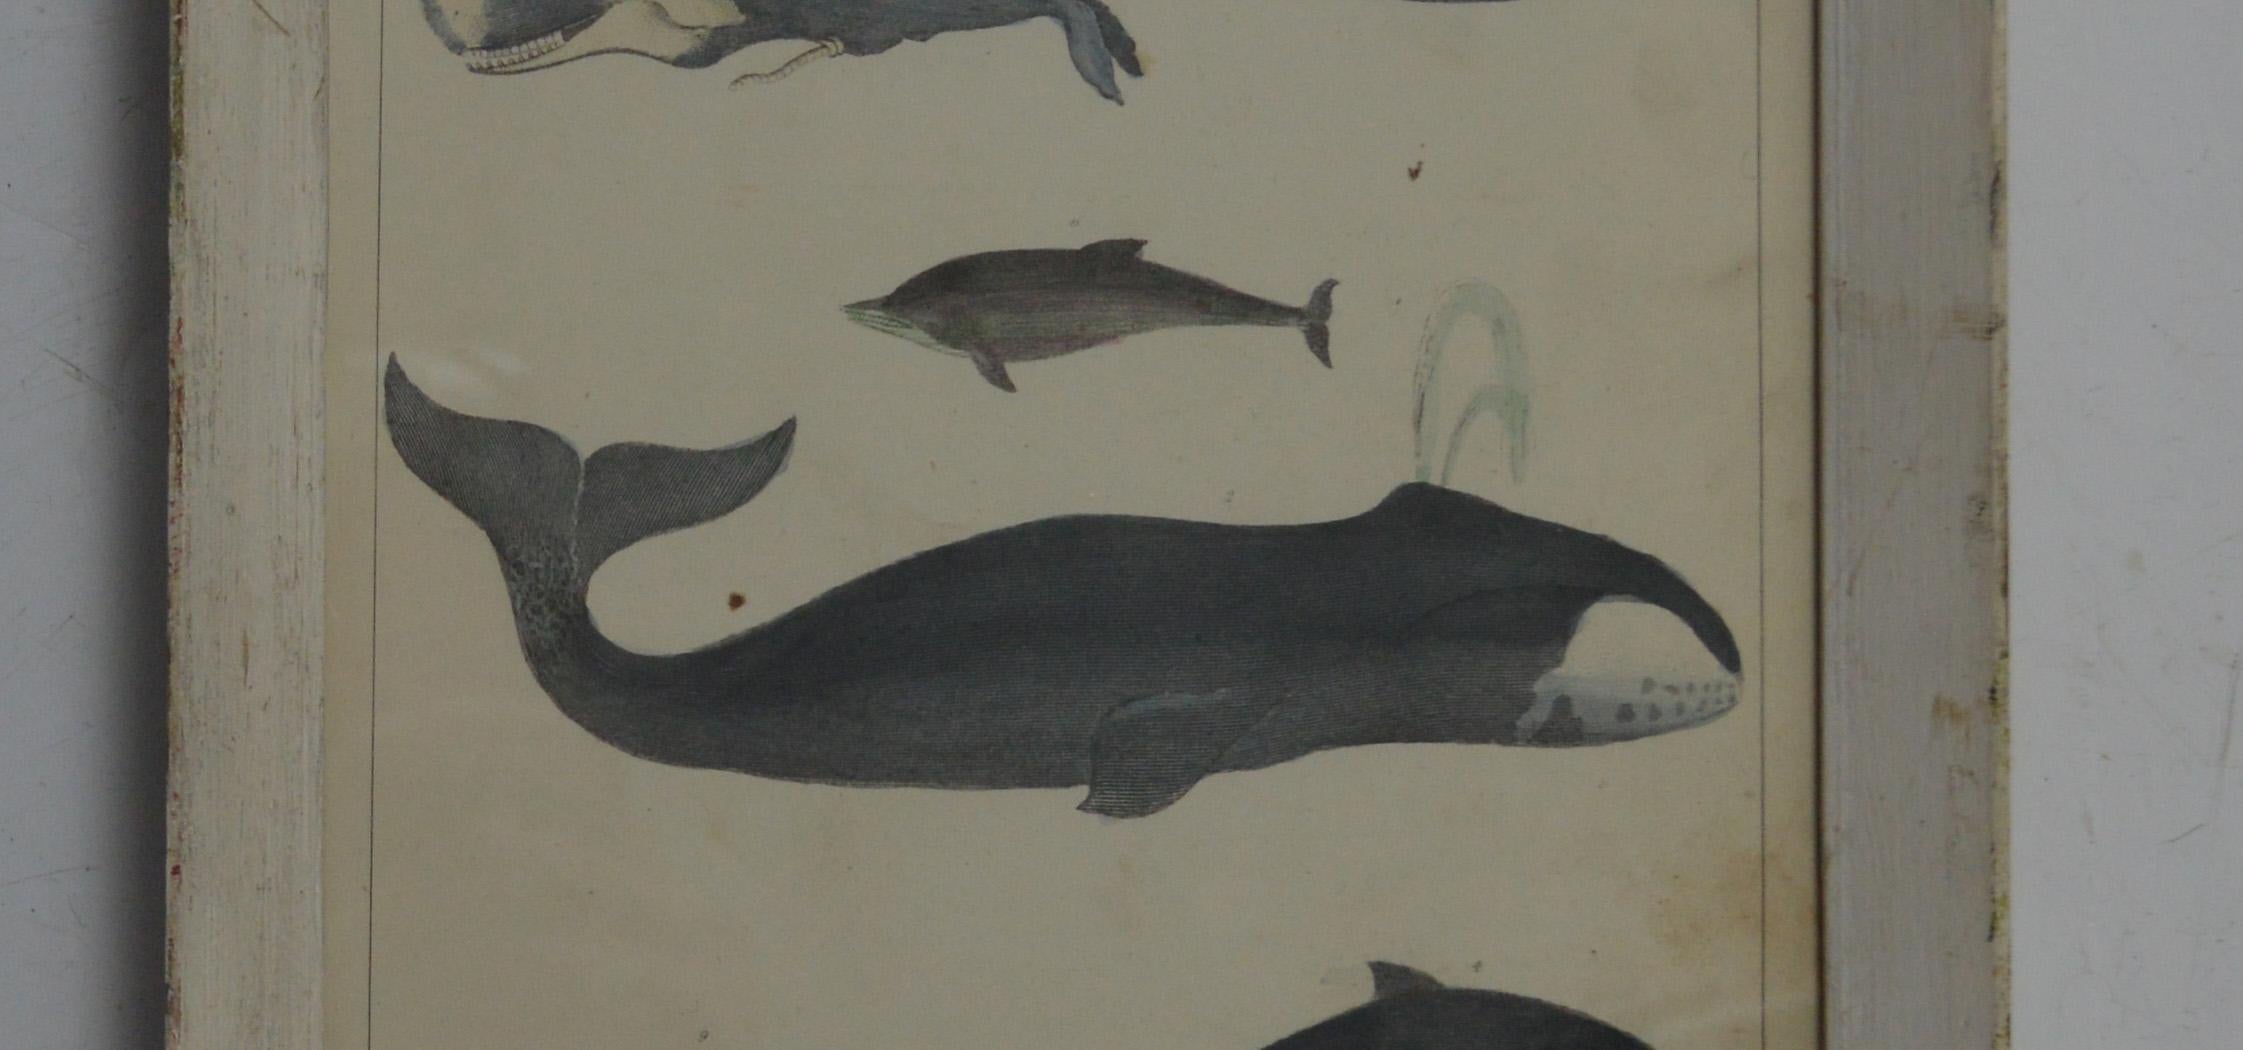 English Original Antique Print of Whales and Dolphins, 1847